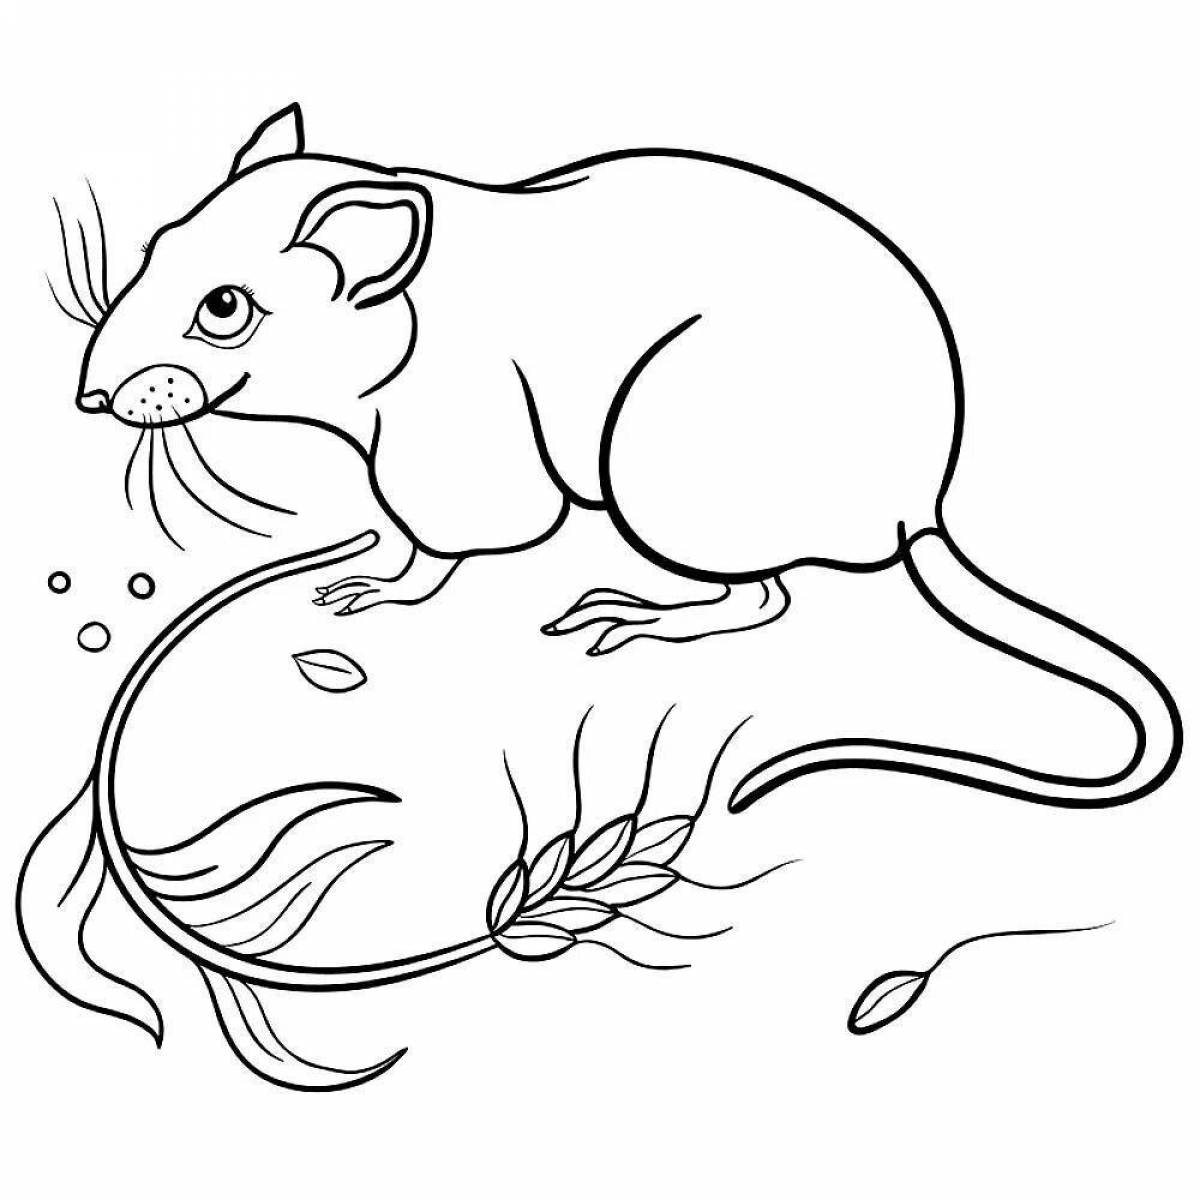 Animated hazel dormouse coloring page